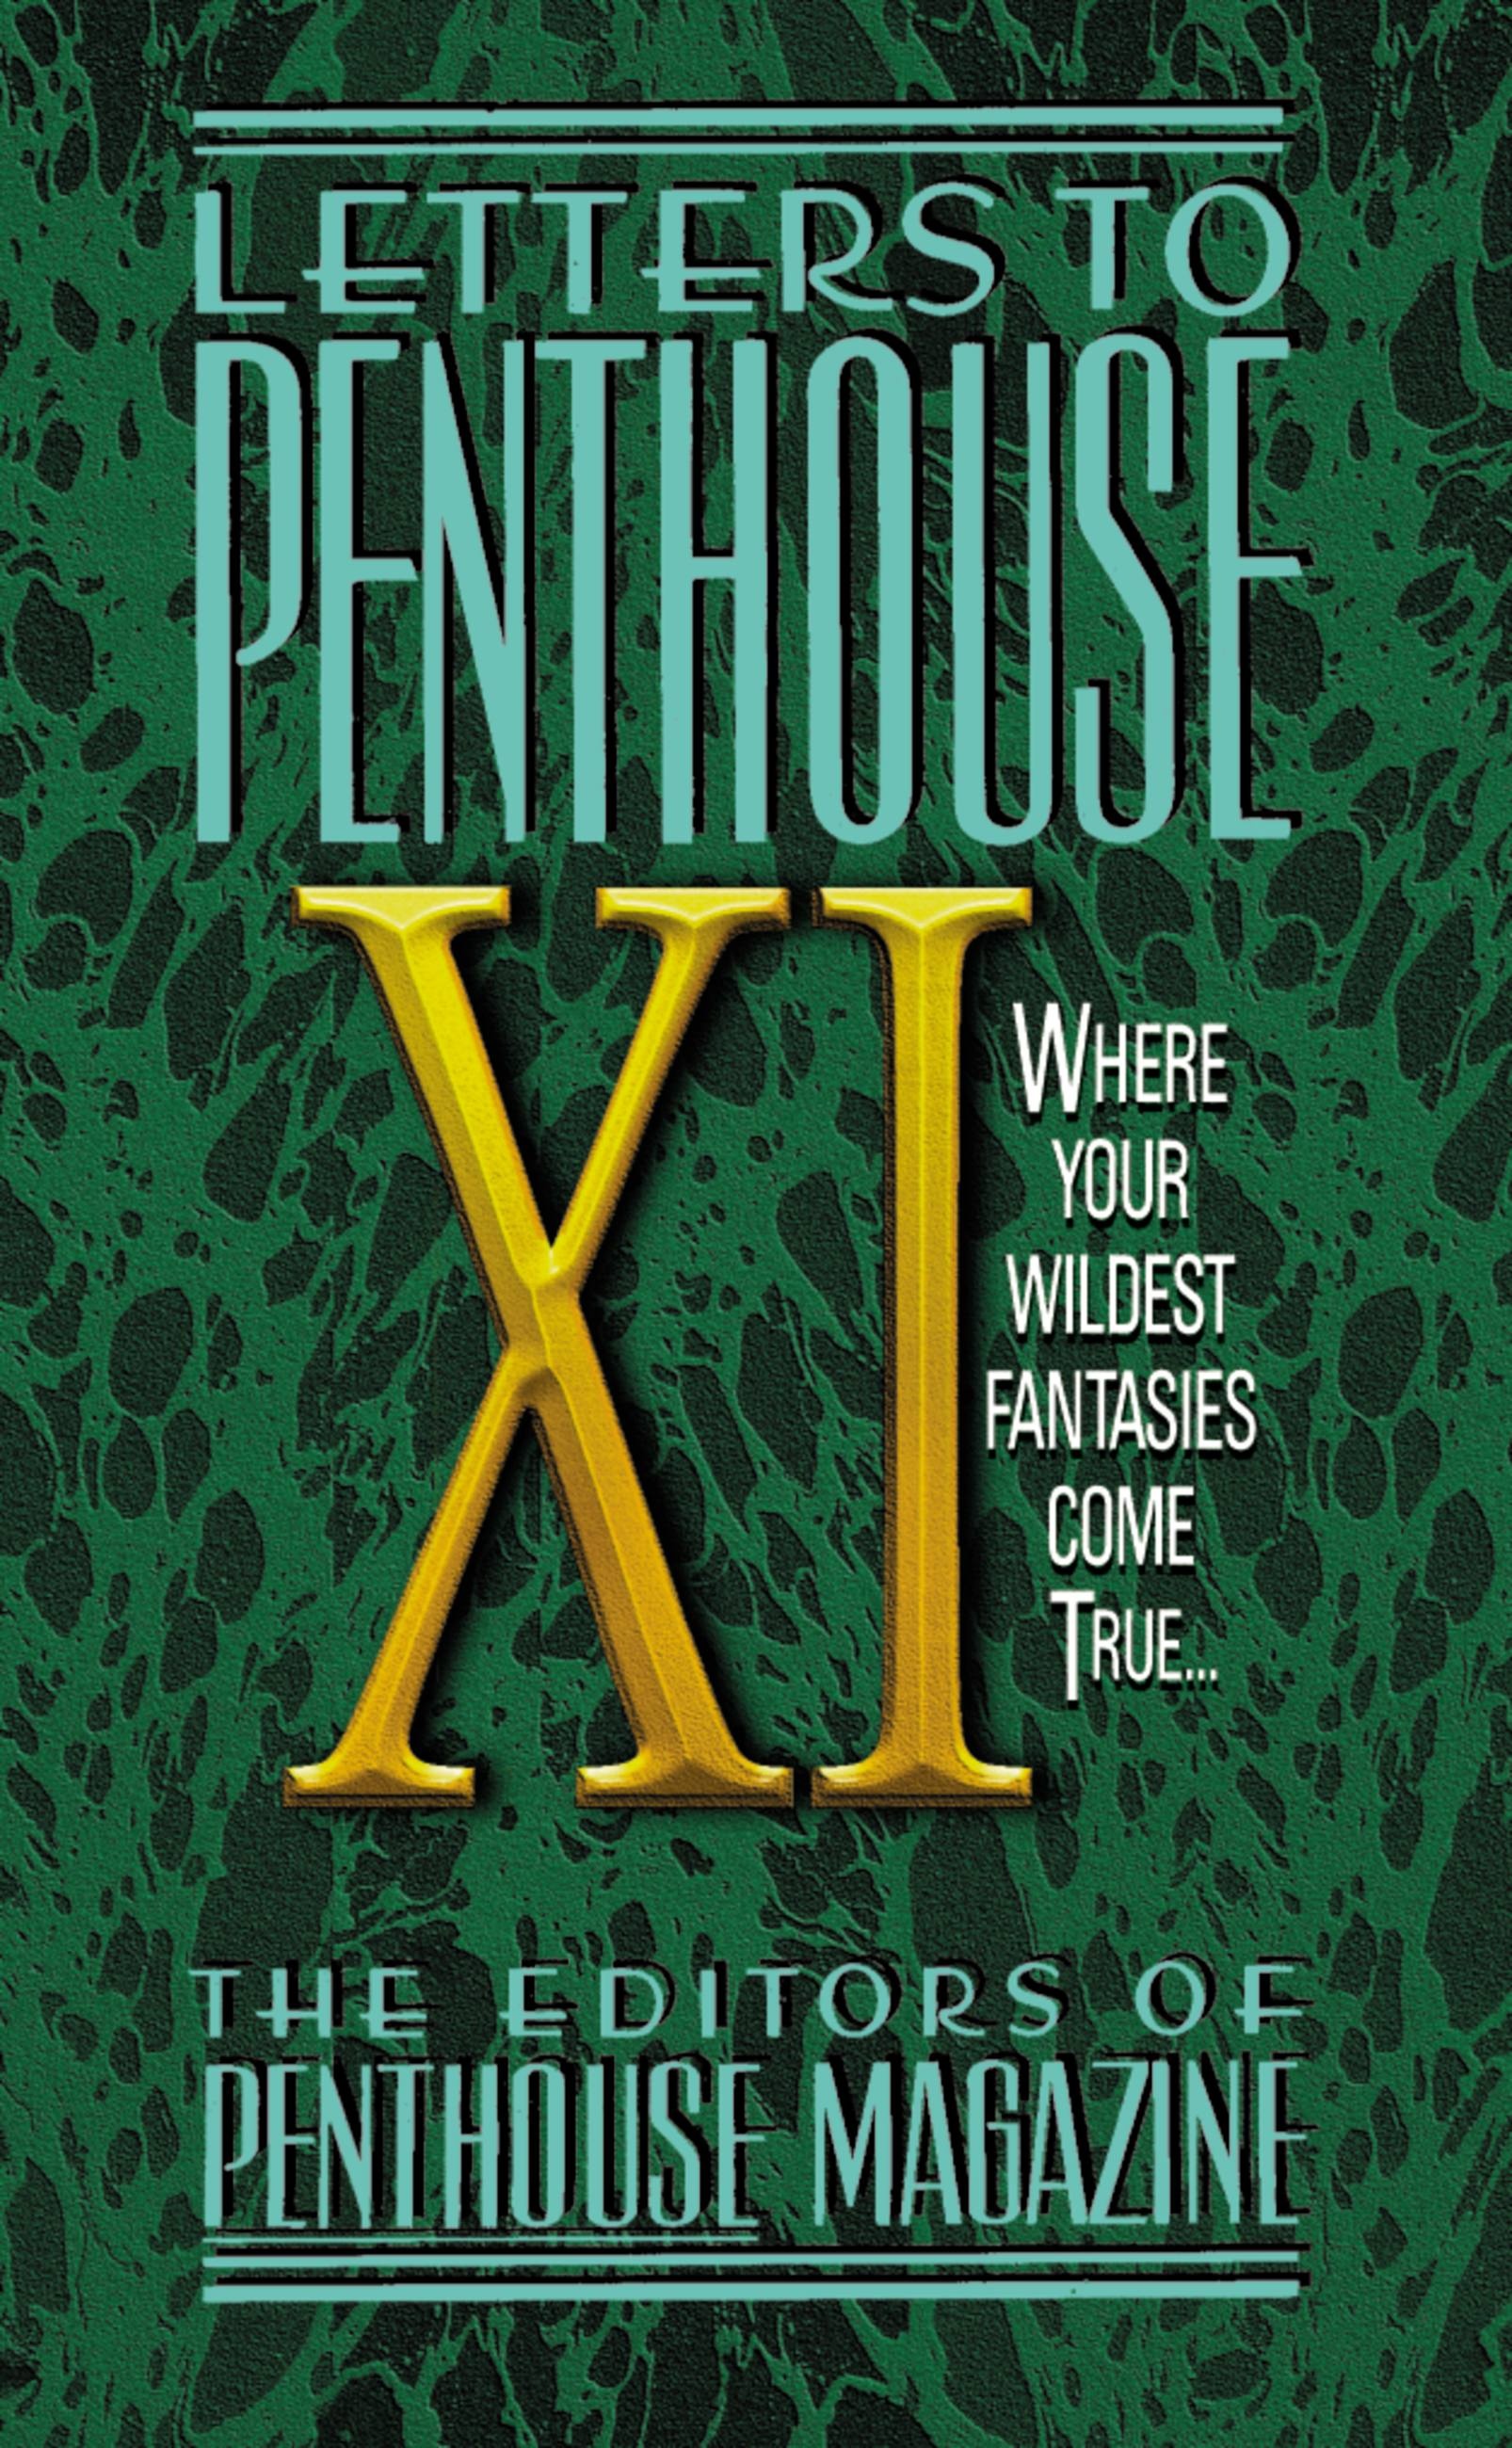 Letters To Penthouse Xi By Penthouse International Hachette Book Group 9506